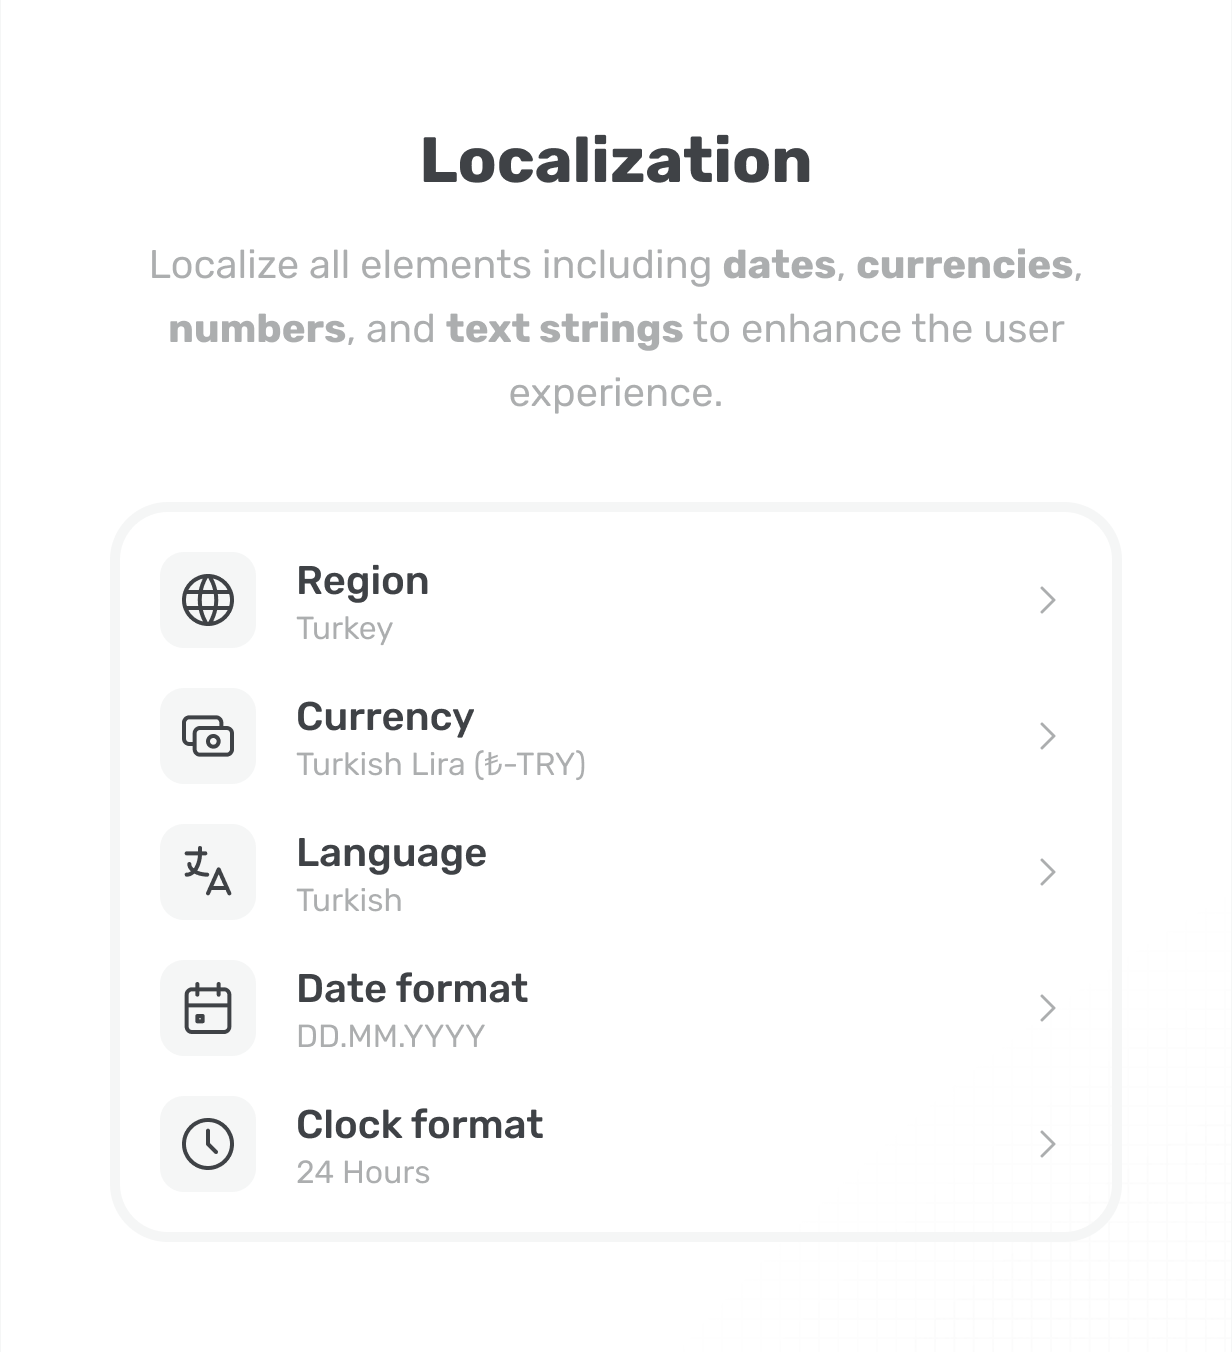 Localize dates, currencies, numbers, and text strings aikeedo @heyaikeedo